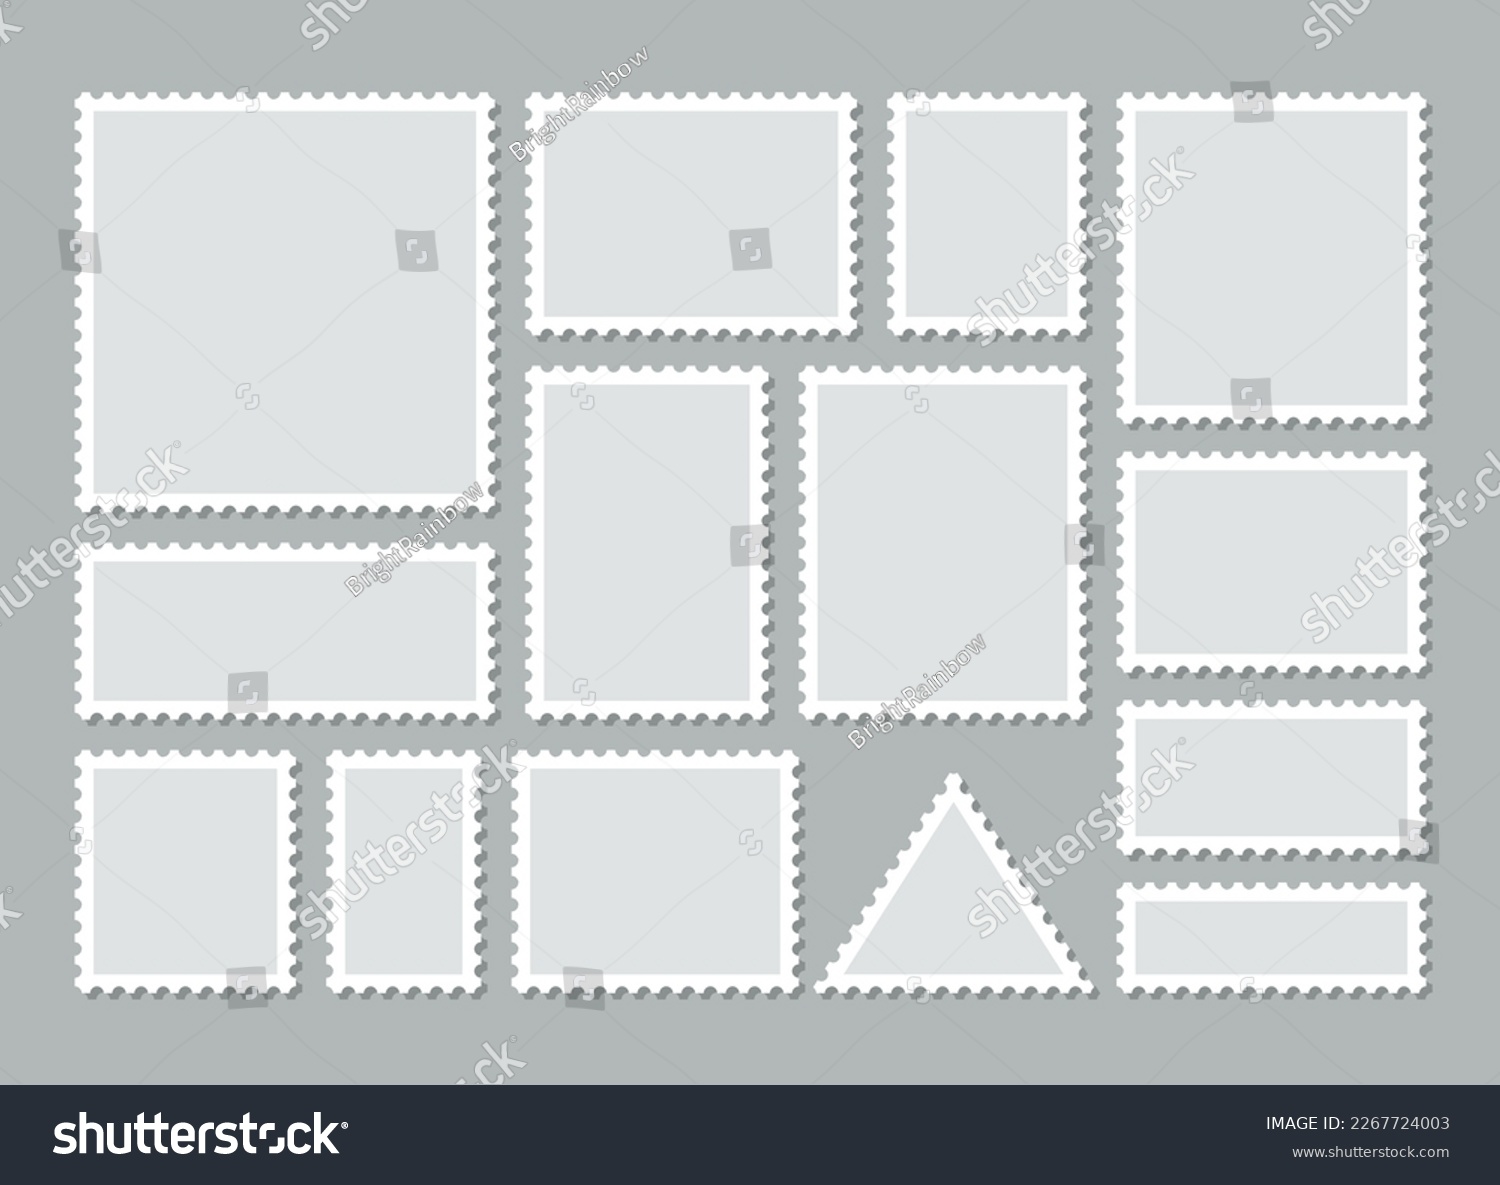 Post stamps. Empty stamps set. Postal shapes border. Blank frames for mail letter. Postage perforated templates. Collection paper postmarks isolated on background. Vector illustration. Flat design. #2267724003